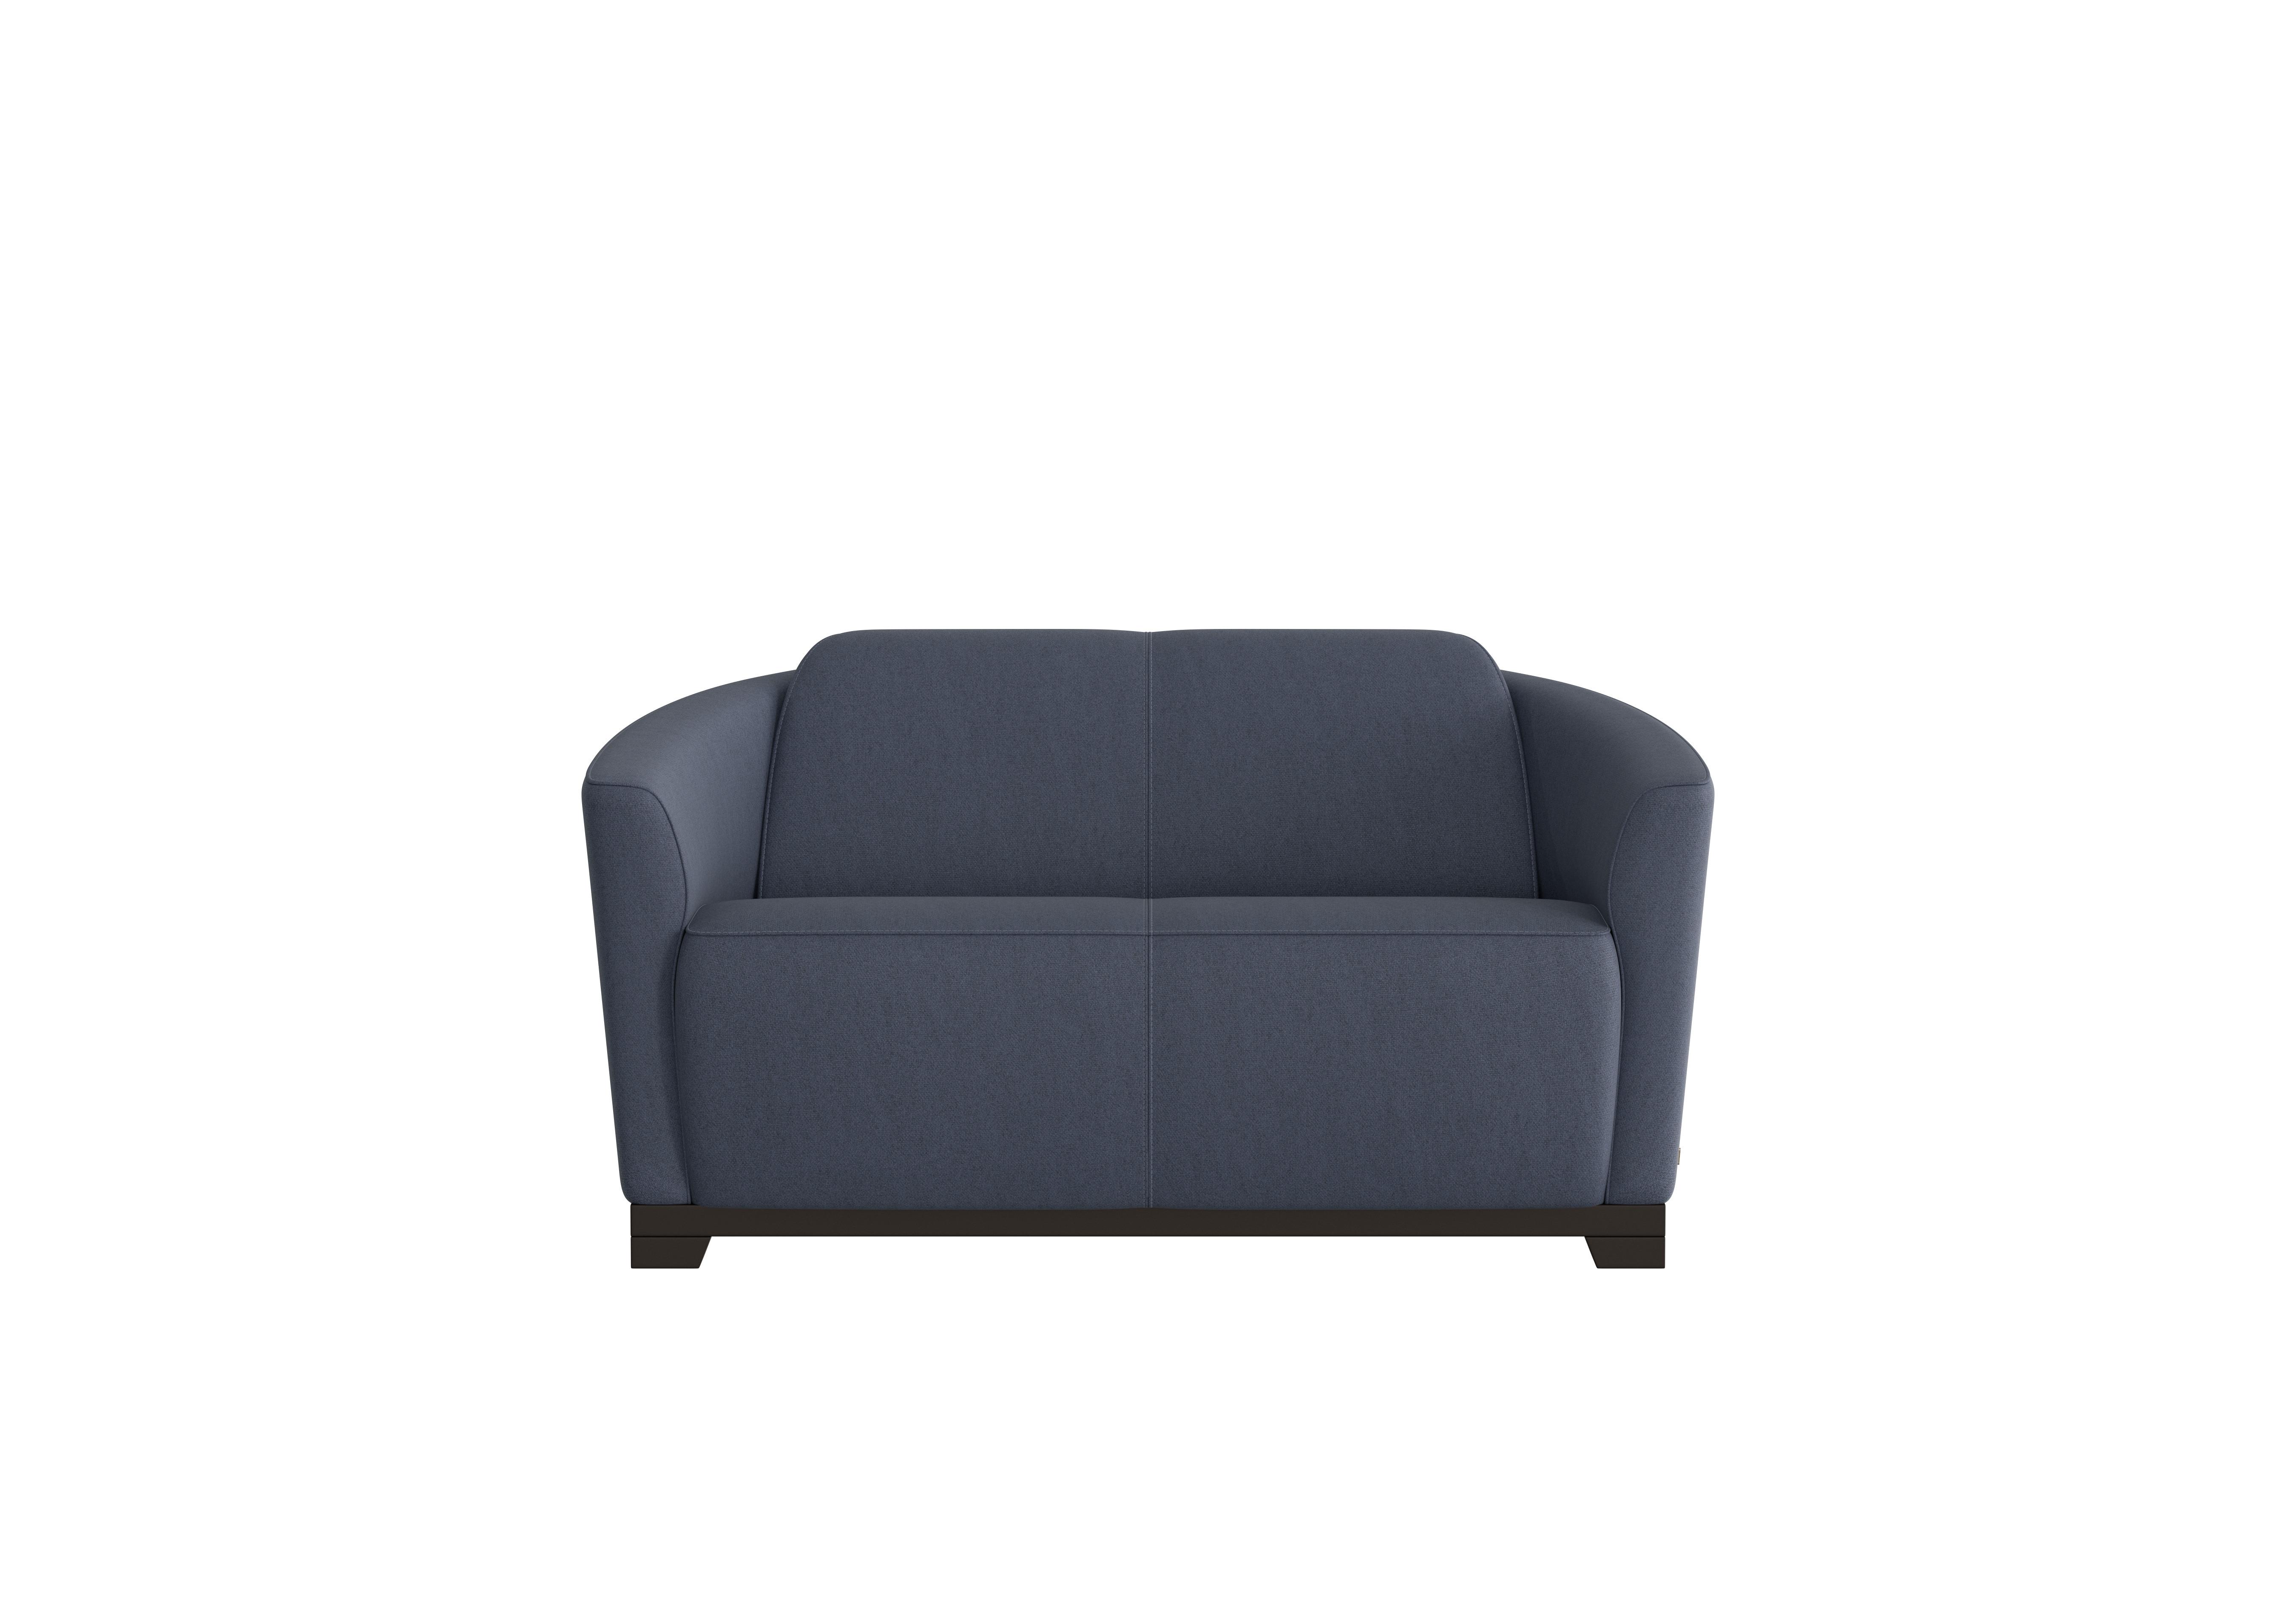 Ketty 2 Seater Fabric Sofa in Fuente Ocean on Furniture Village